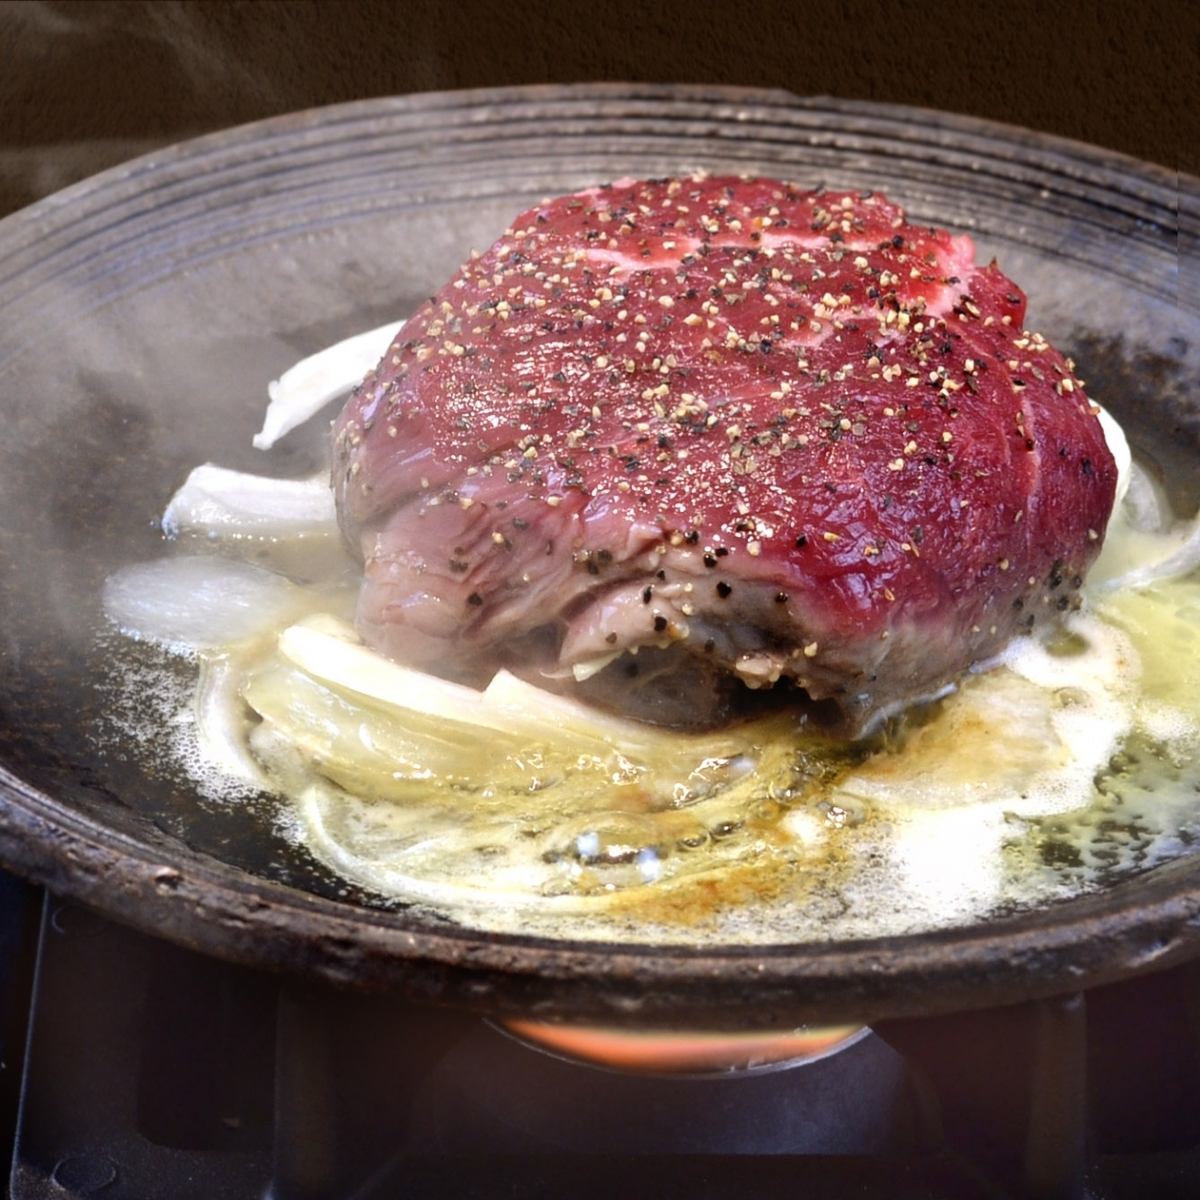 Wagyu beef fillet steak served with your favorite seasonings such as wasabi and rock salt.